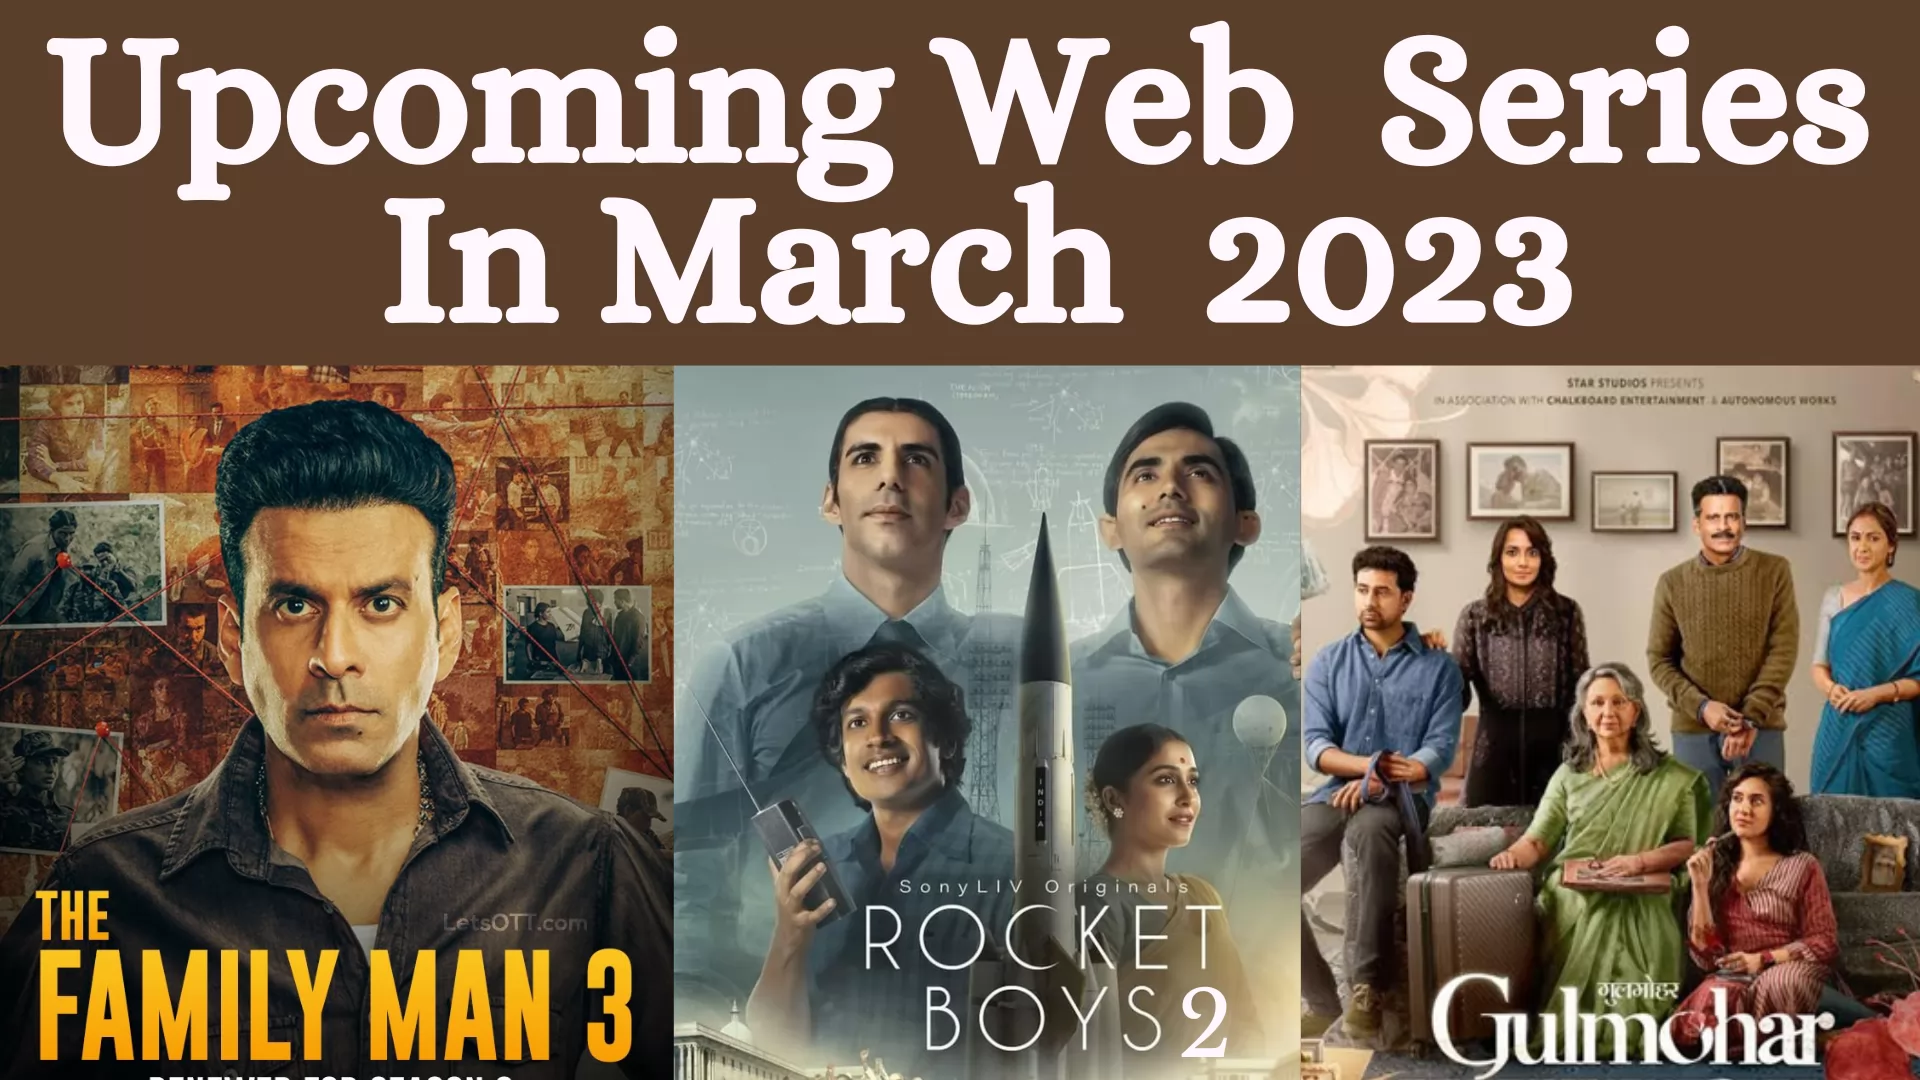 Upcoming Web Series in March 2023